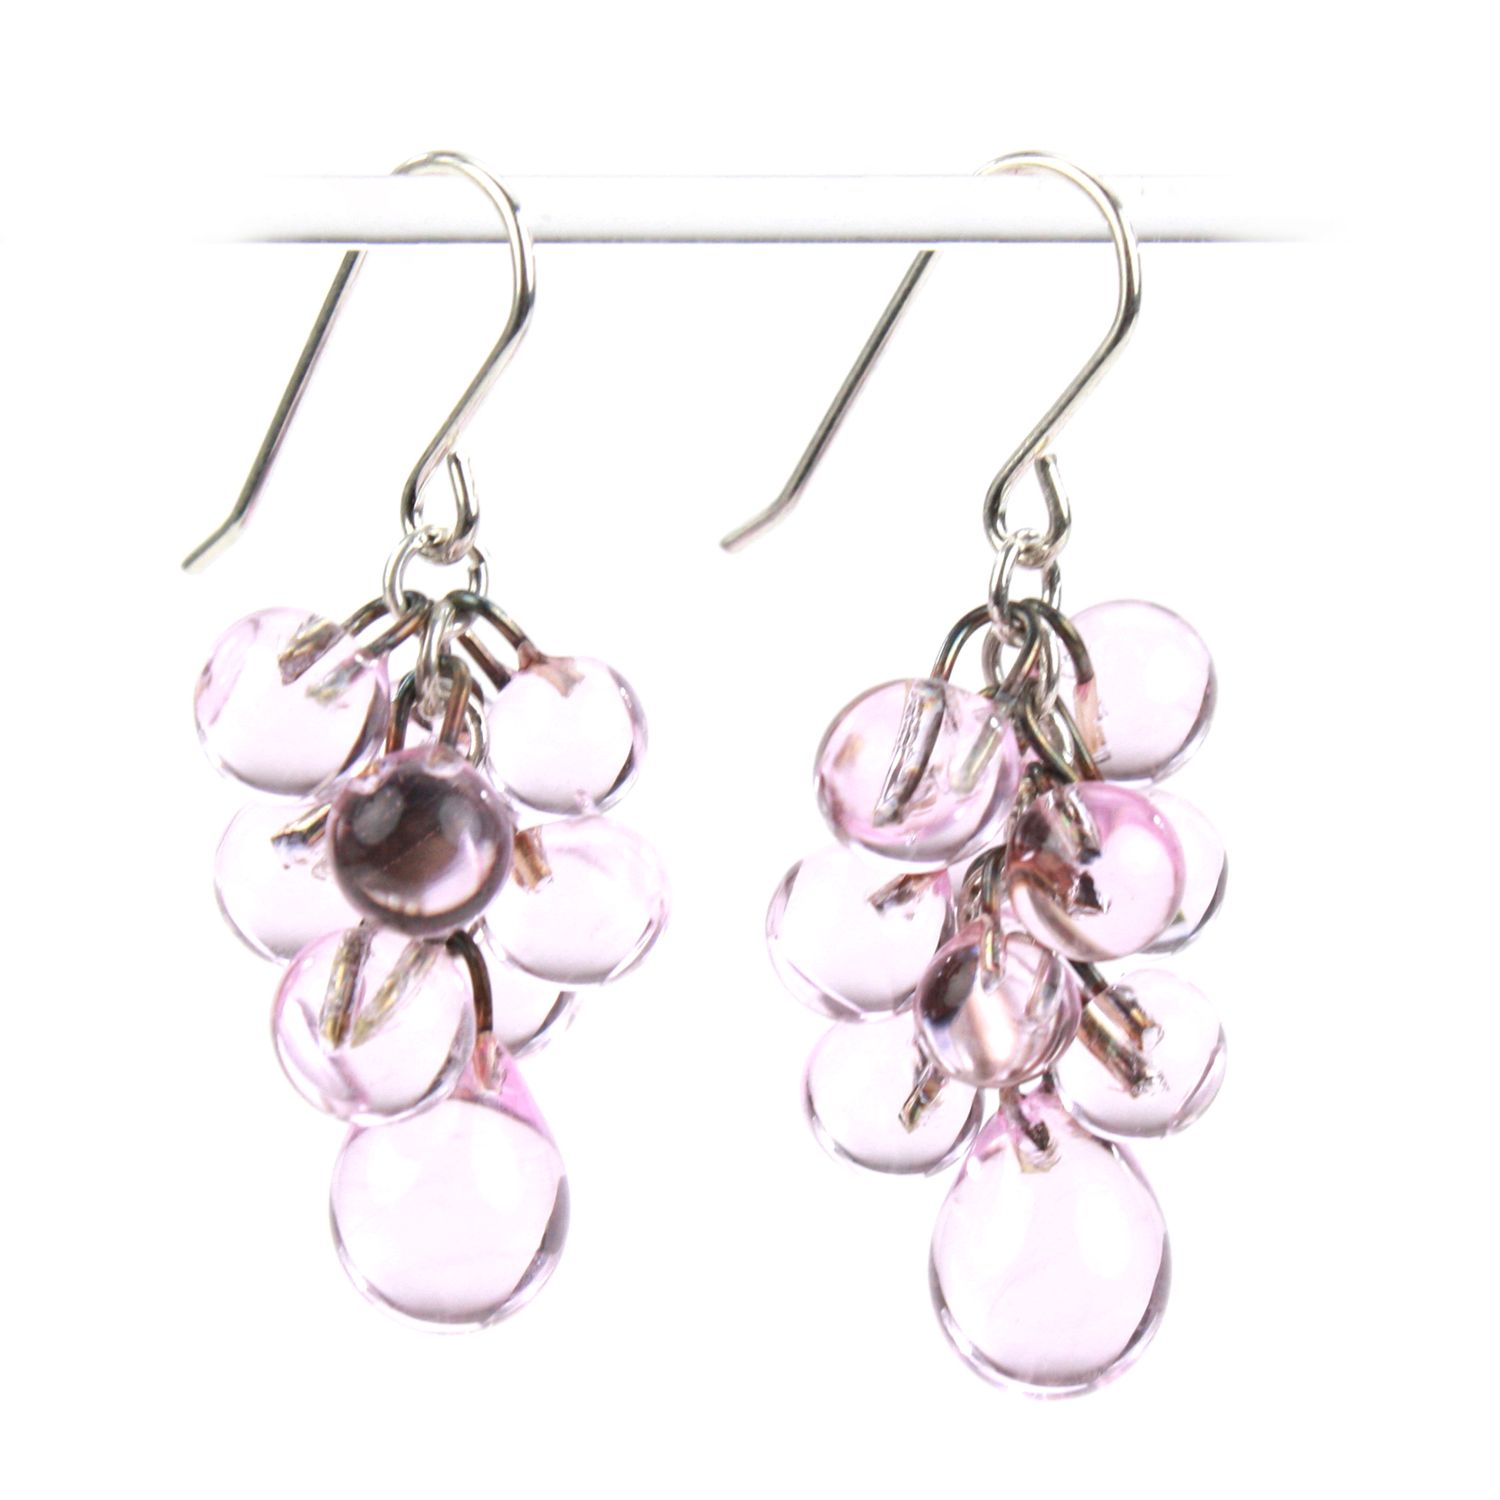 Alicia Niles: Chroma Earrings – Pink Product Image 1 of 1